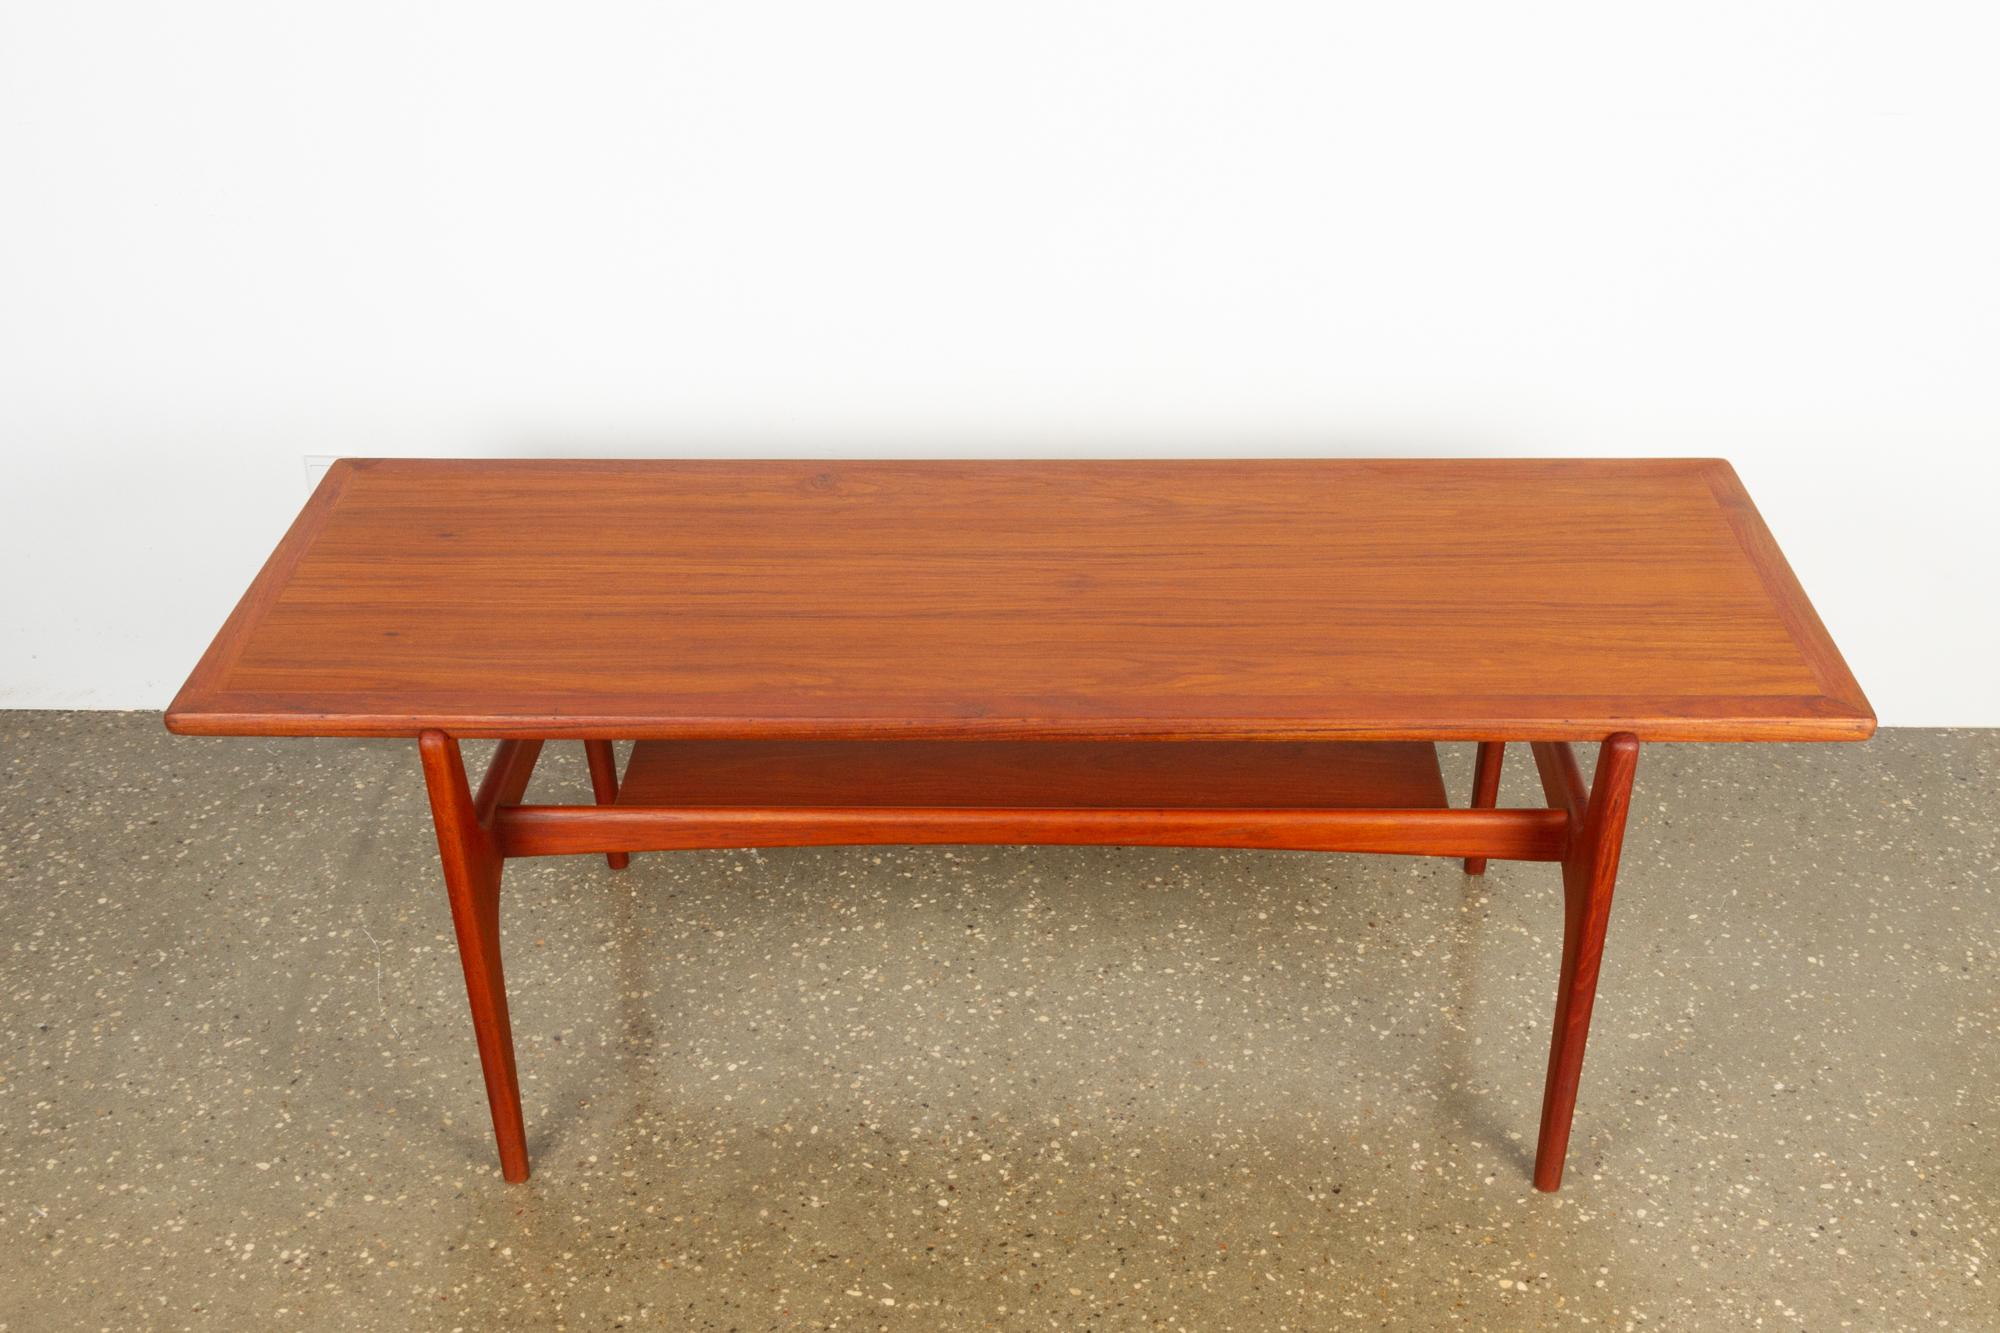 Vintage Danish teak coffee table, 1960s
Period typical Danish Mid-Century Modern coffee table with detachable tabletop. Large magazine shelf. Narrow contoured legs gives this table a wonderful and elegant silhouette. Wide edge in solid teak.
The